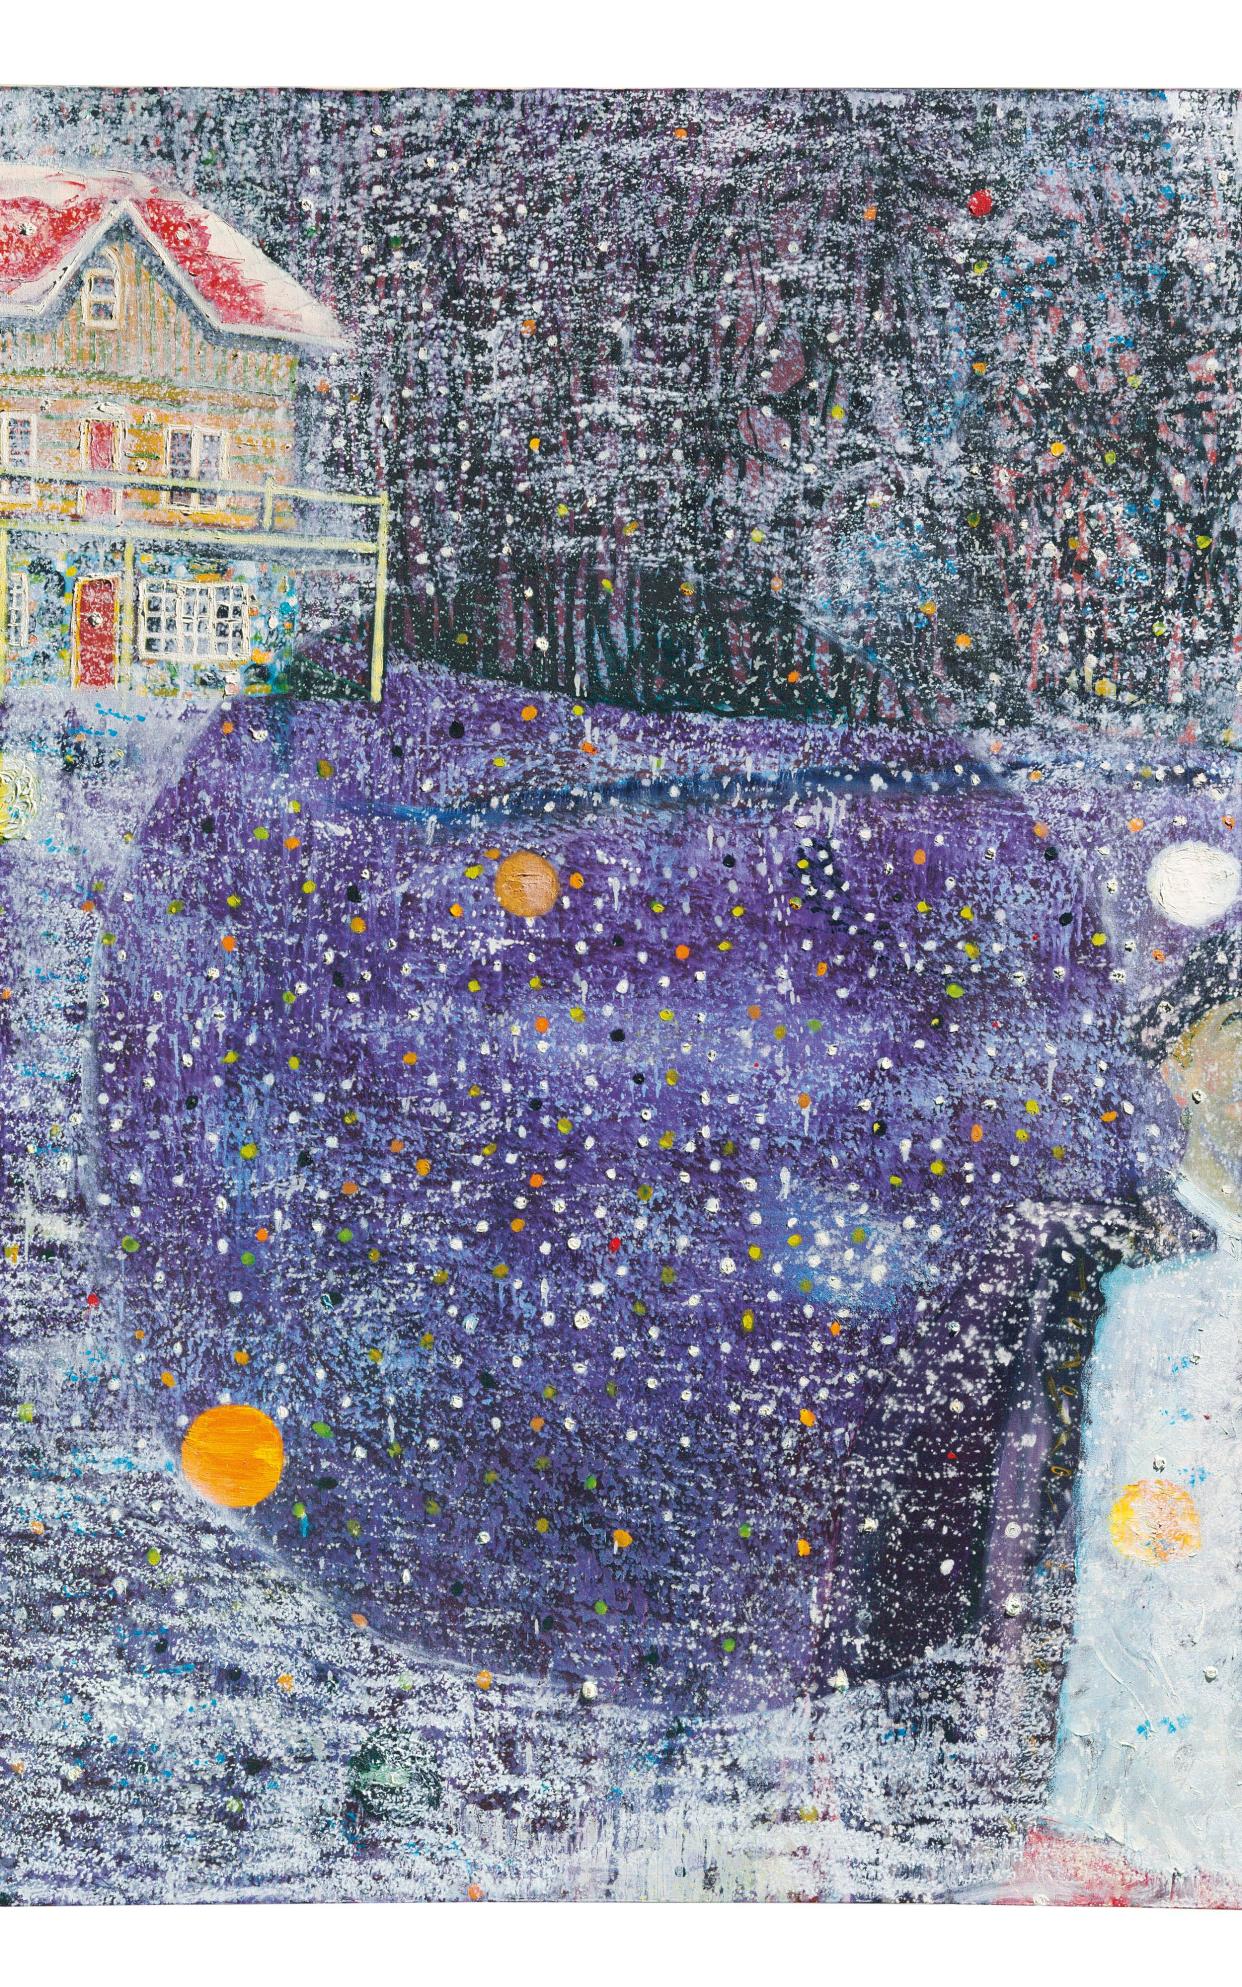 Peter Doig, Charley’s Space, 1991. Estimate: £6,000,000 – £8,000,000. Sold to benefit the Donald R. Sobey Foundation.